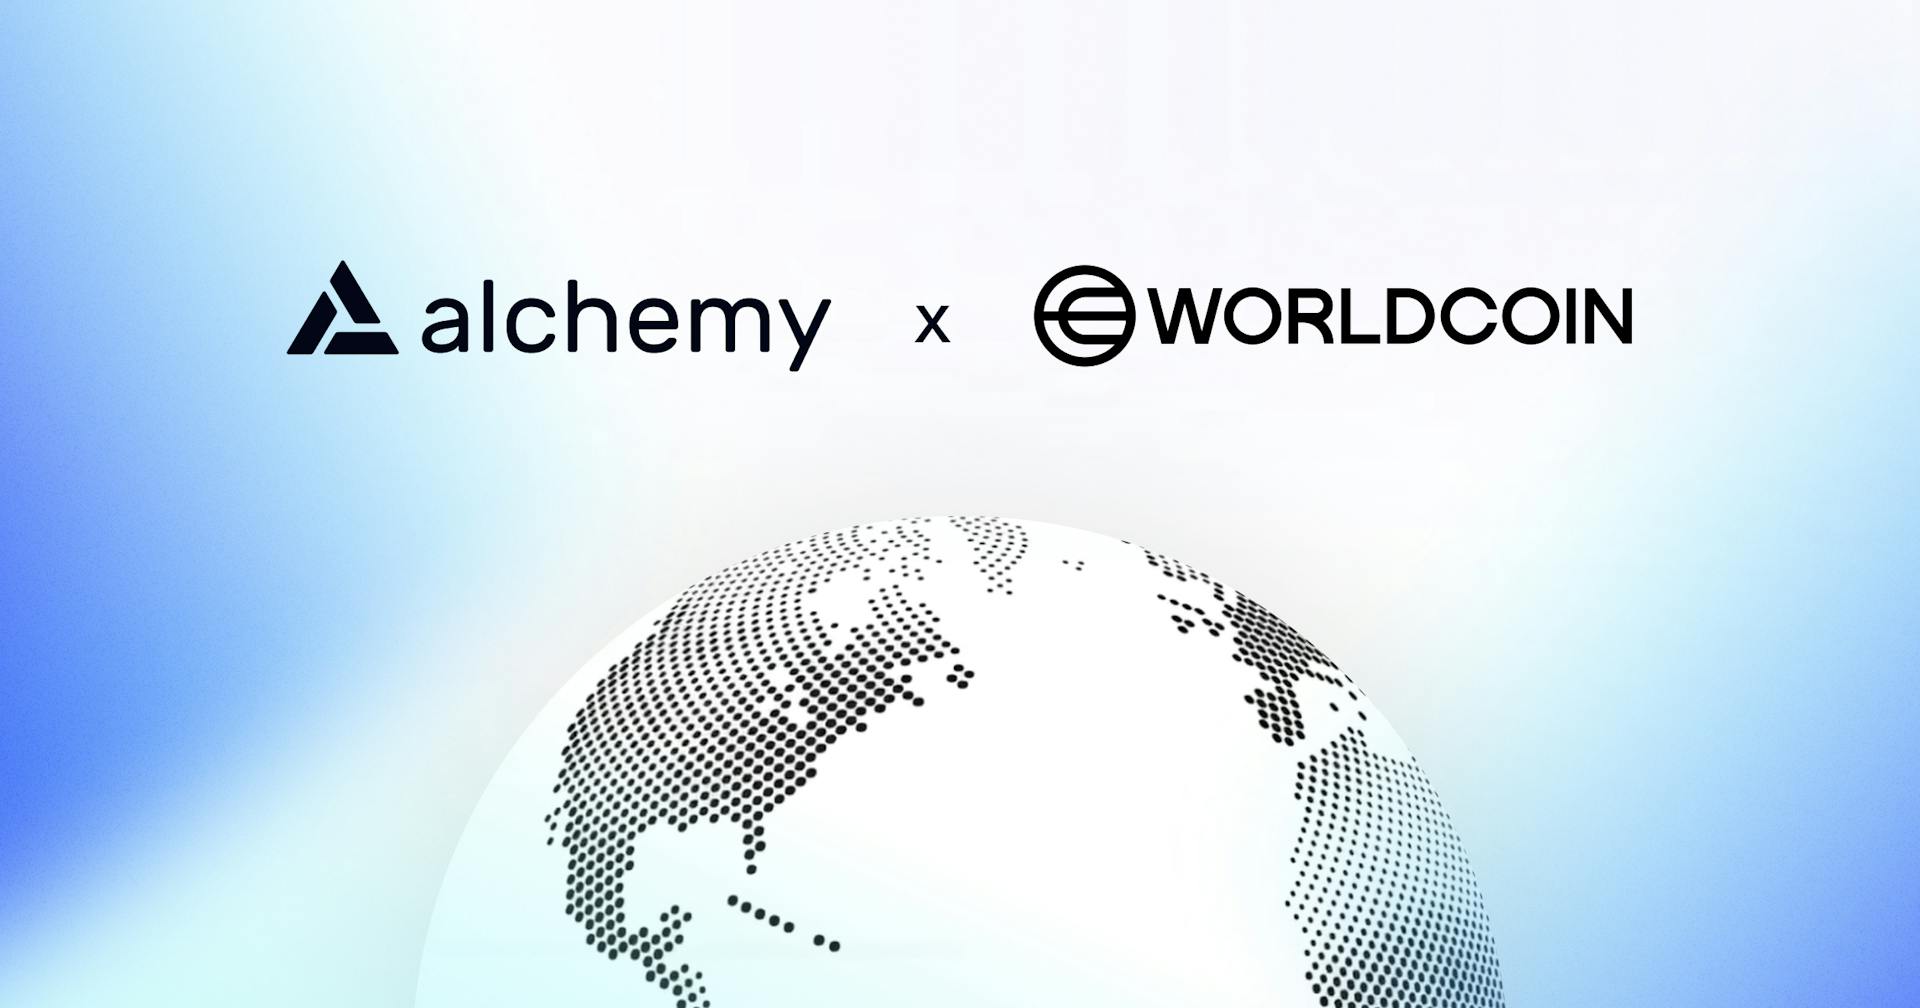 Alchemy and Worldcoin partner to launch World Chain